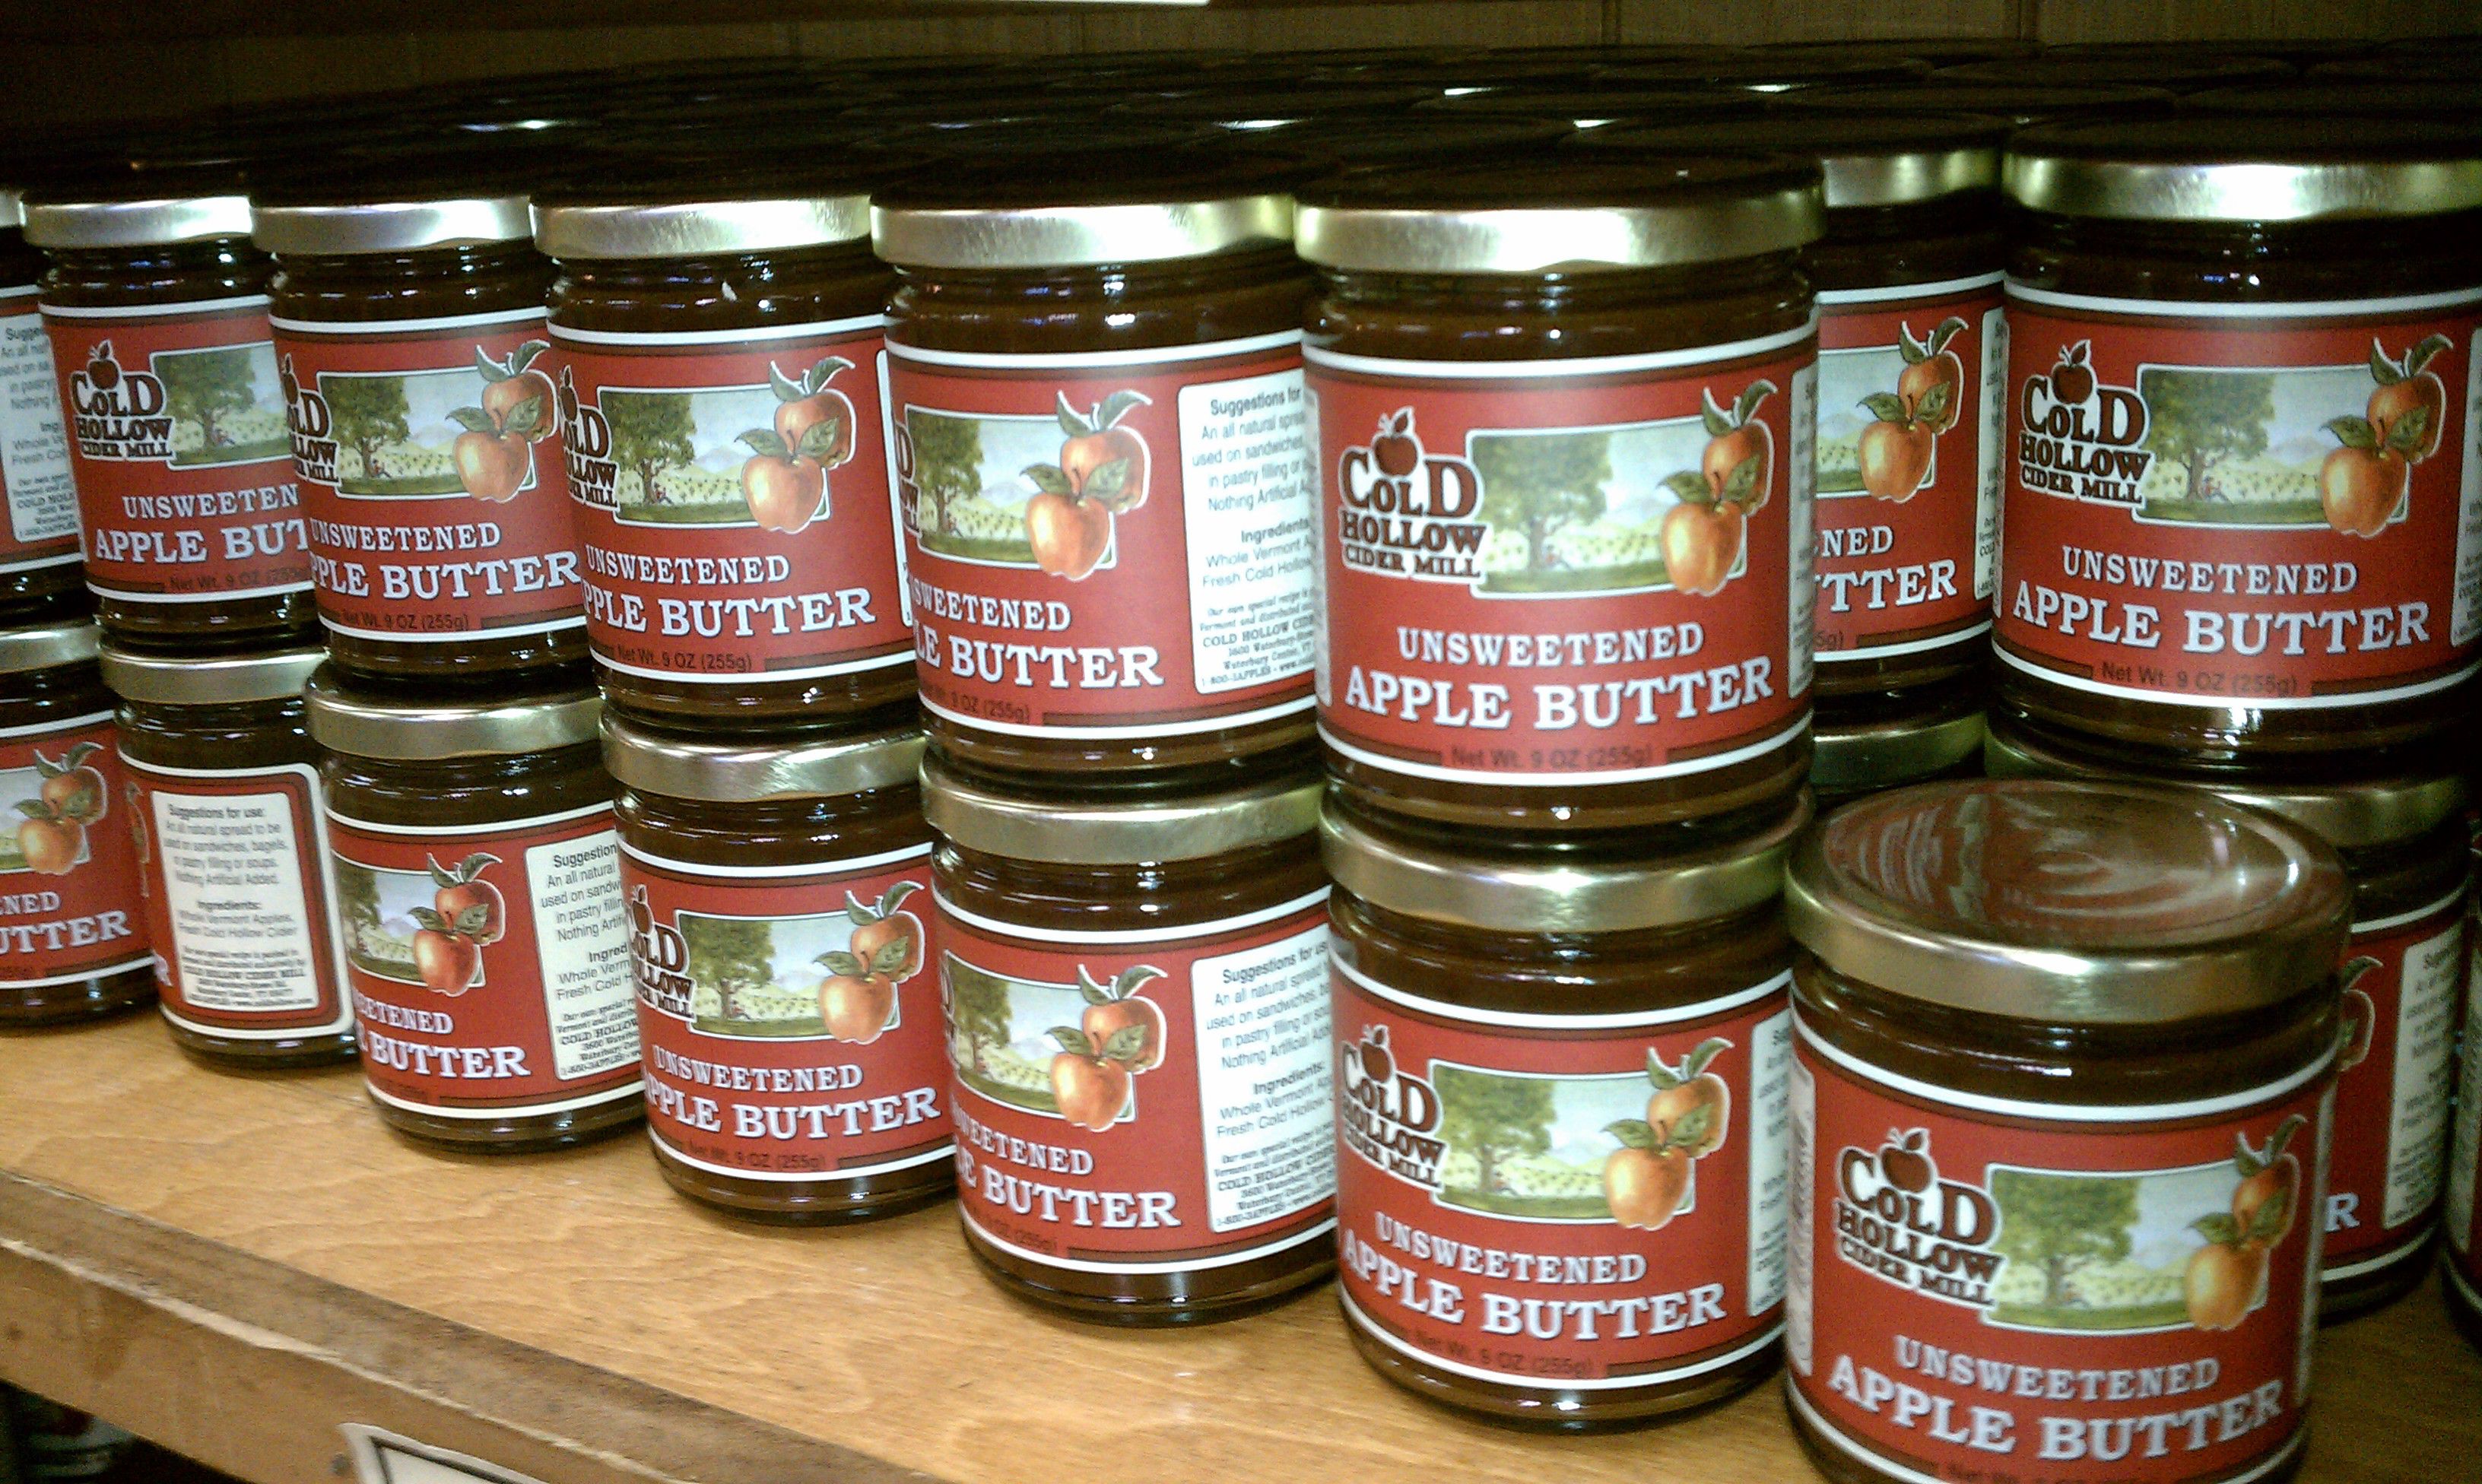 Local jams, butter and much more!